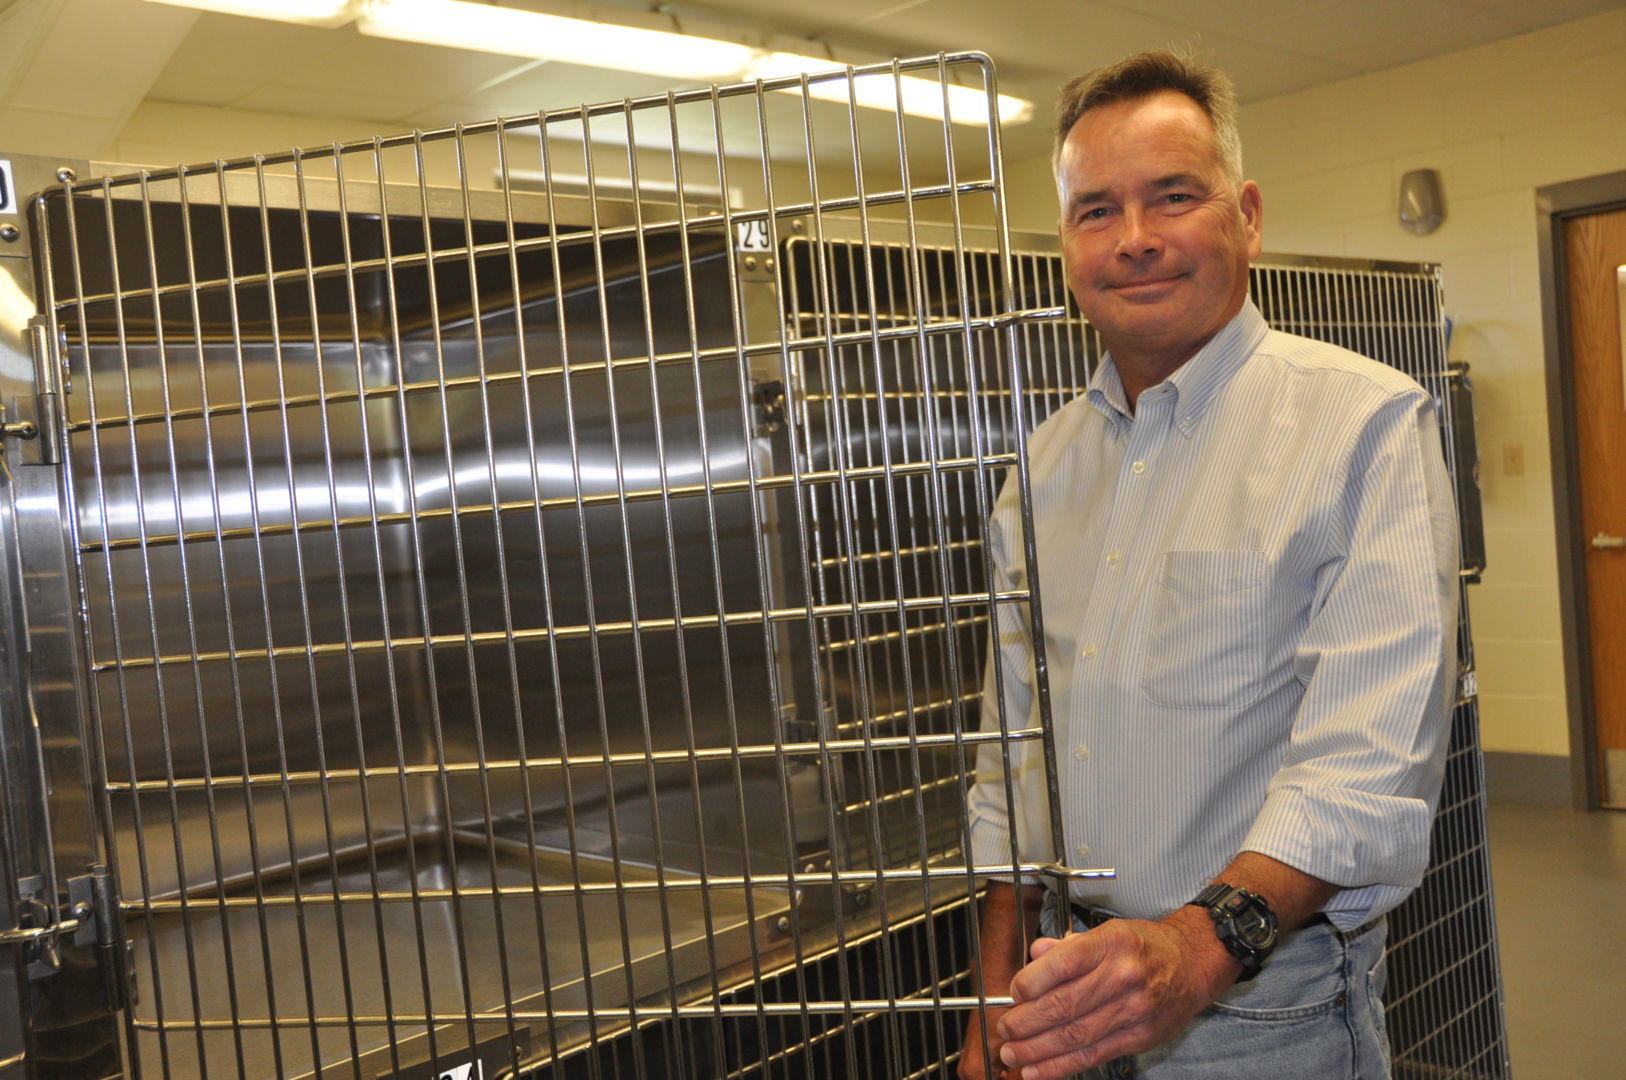 Dr. George McCommon, Fort Valley State University’s department head and associate professor of veterinary science and public health, prepares for more than 100 wild animals from Oatland Island Wildlife Center of Savannah to arrive Saturday at FVSU’s State Animal Facility for Emergencies (SAFE) Center.